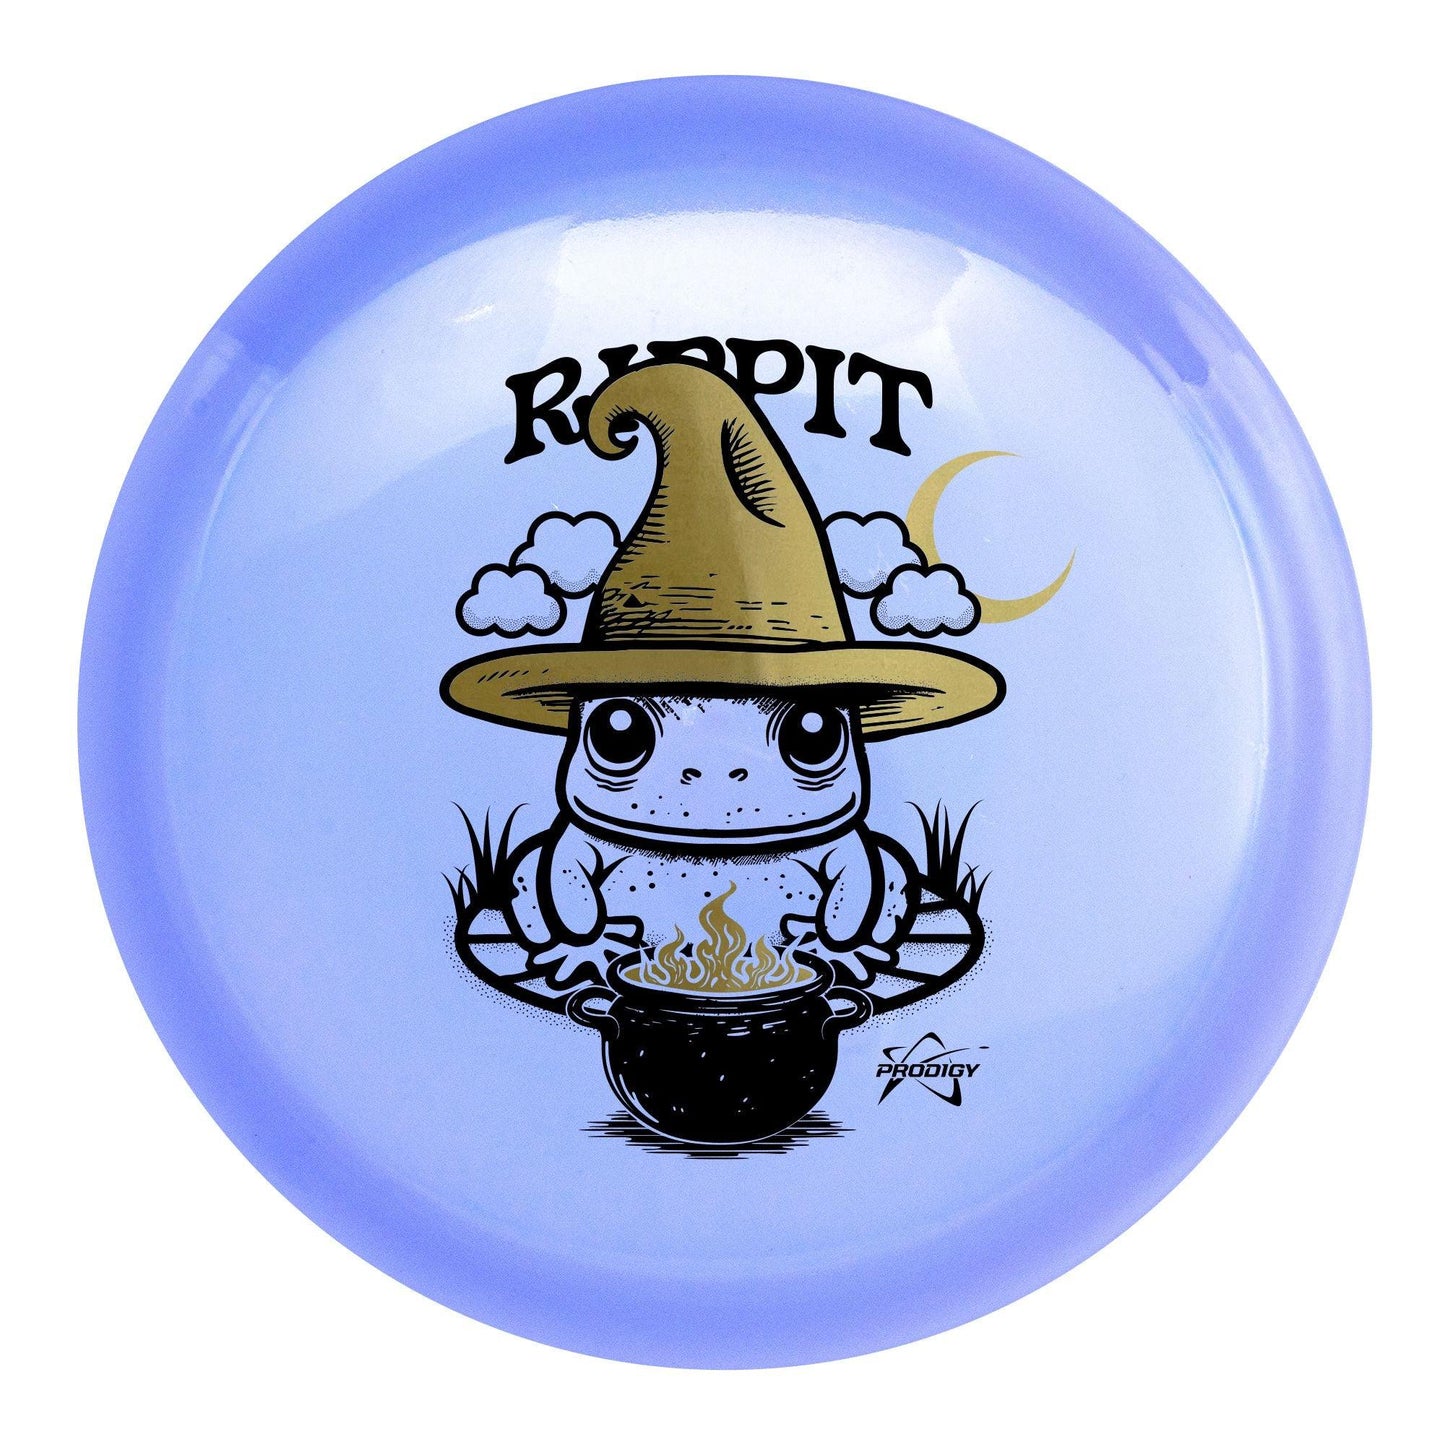 Prodigy 400 Color Glow F3 - Rippit Halloween Stamp - Disc Golf Deals USA